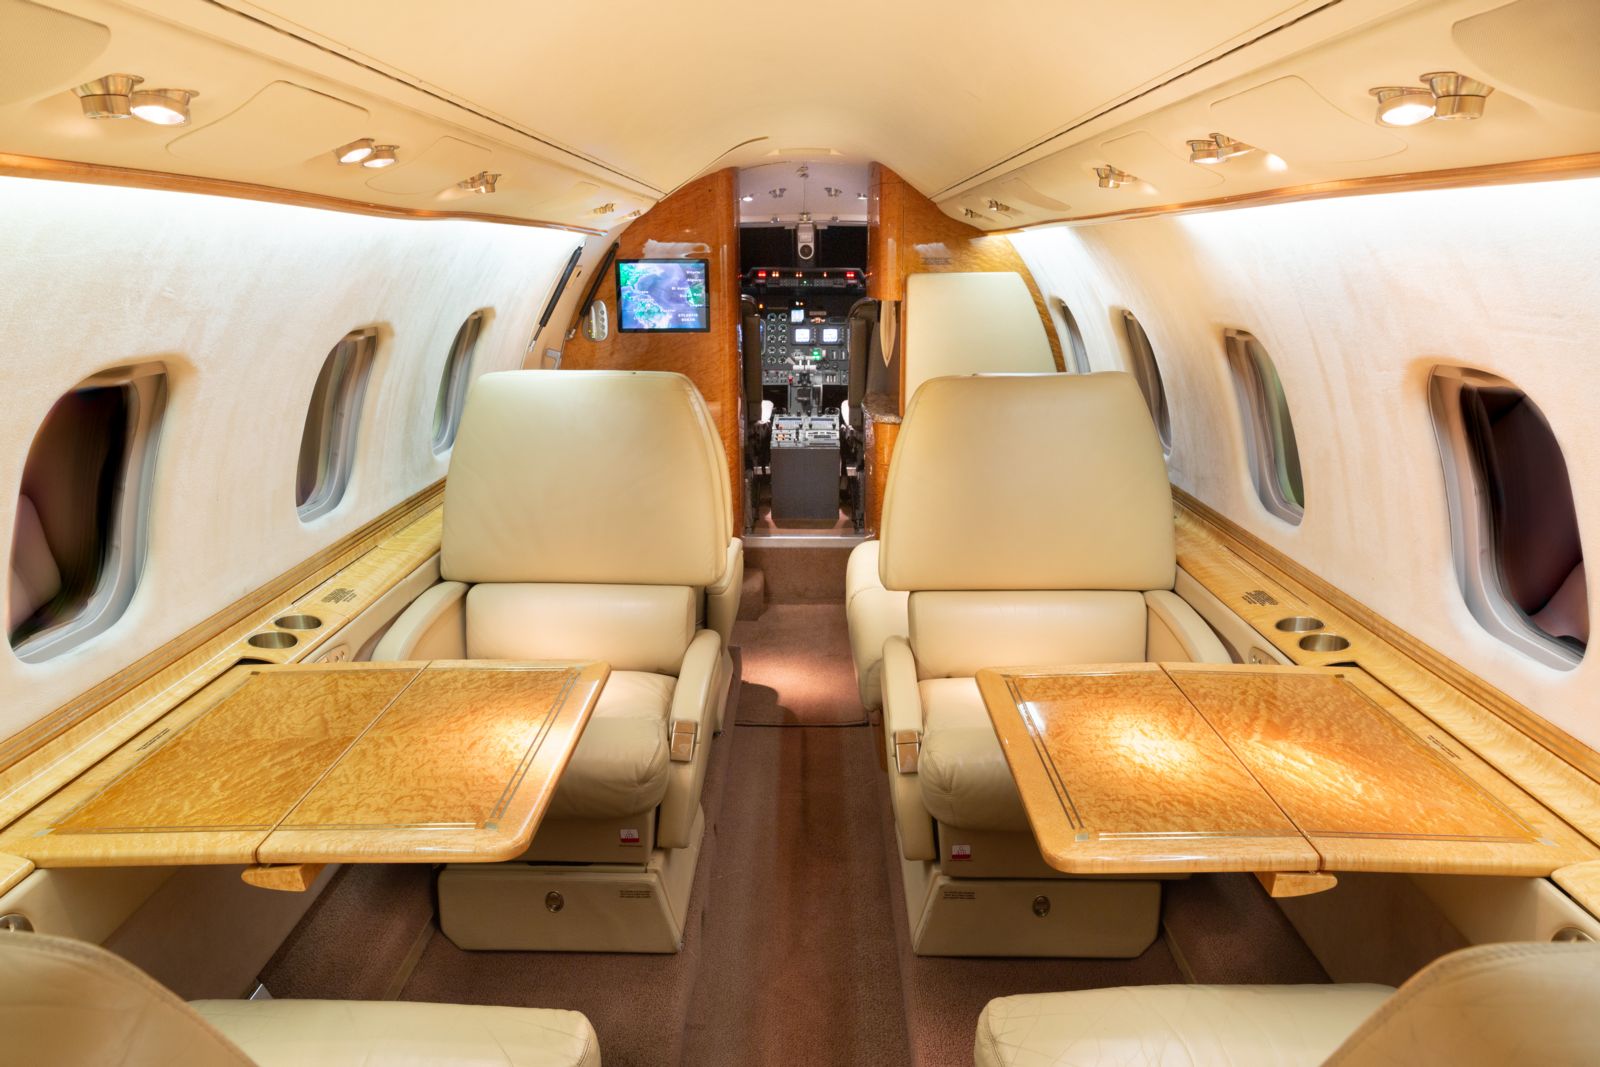 Bombardier Learjet 60  S/N 269 for sale | gallery image: /userfiles/images/Lear60_sn269/aft%20fwd.jpg